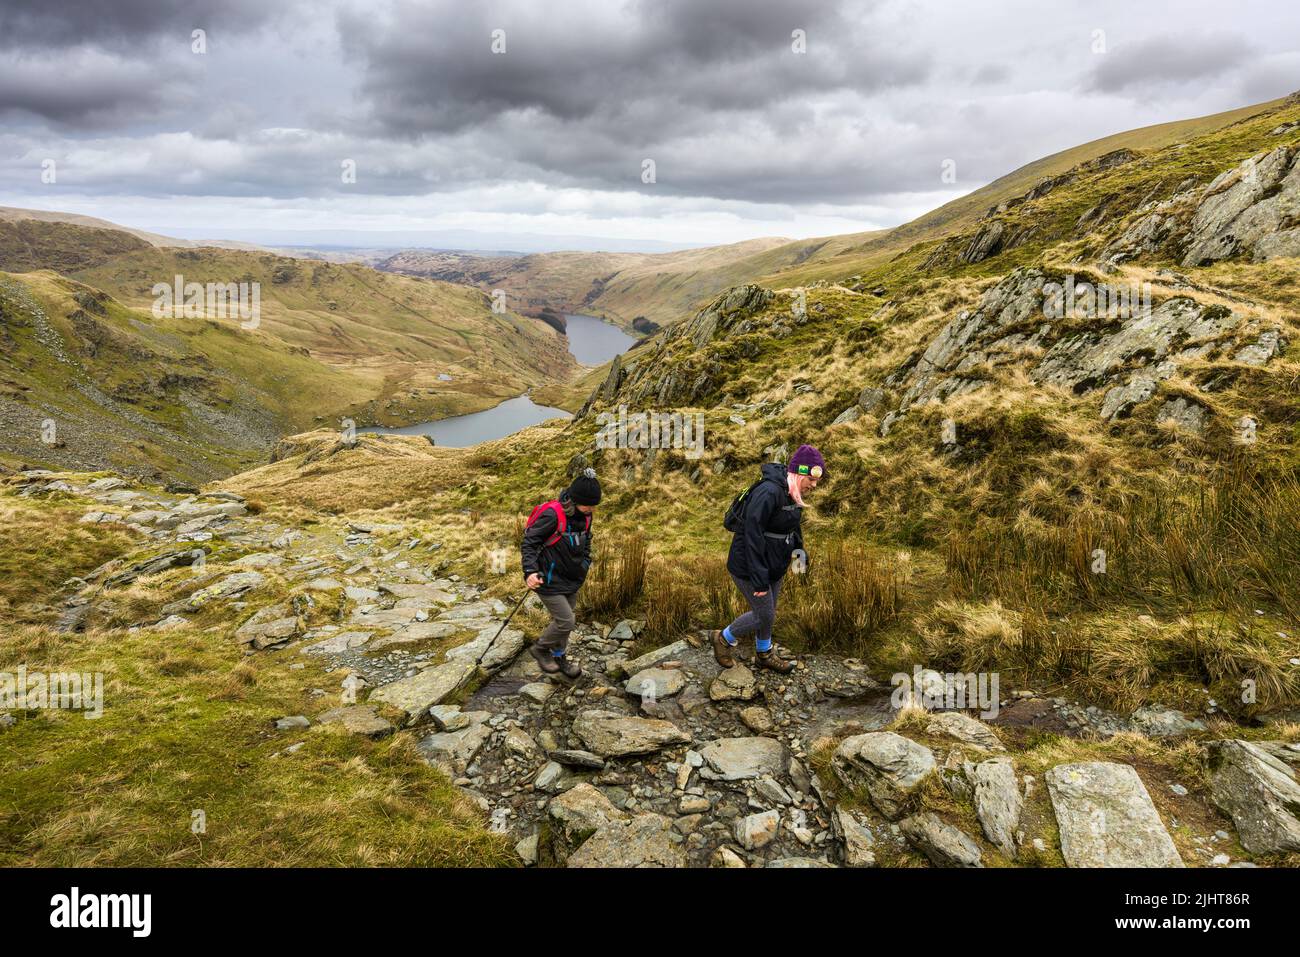 Two walkers ascending Nan Bield Pass with Small Water Tarn and Haweswater Reservoir below in the Lake District National Park, Cumbria, England. Stock Photo